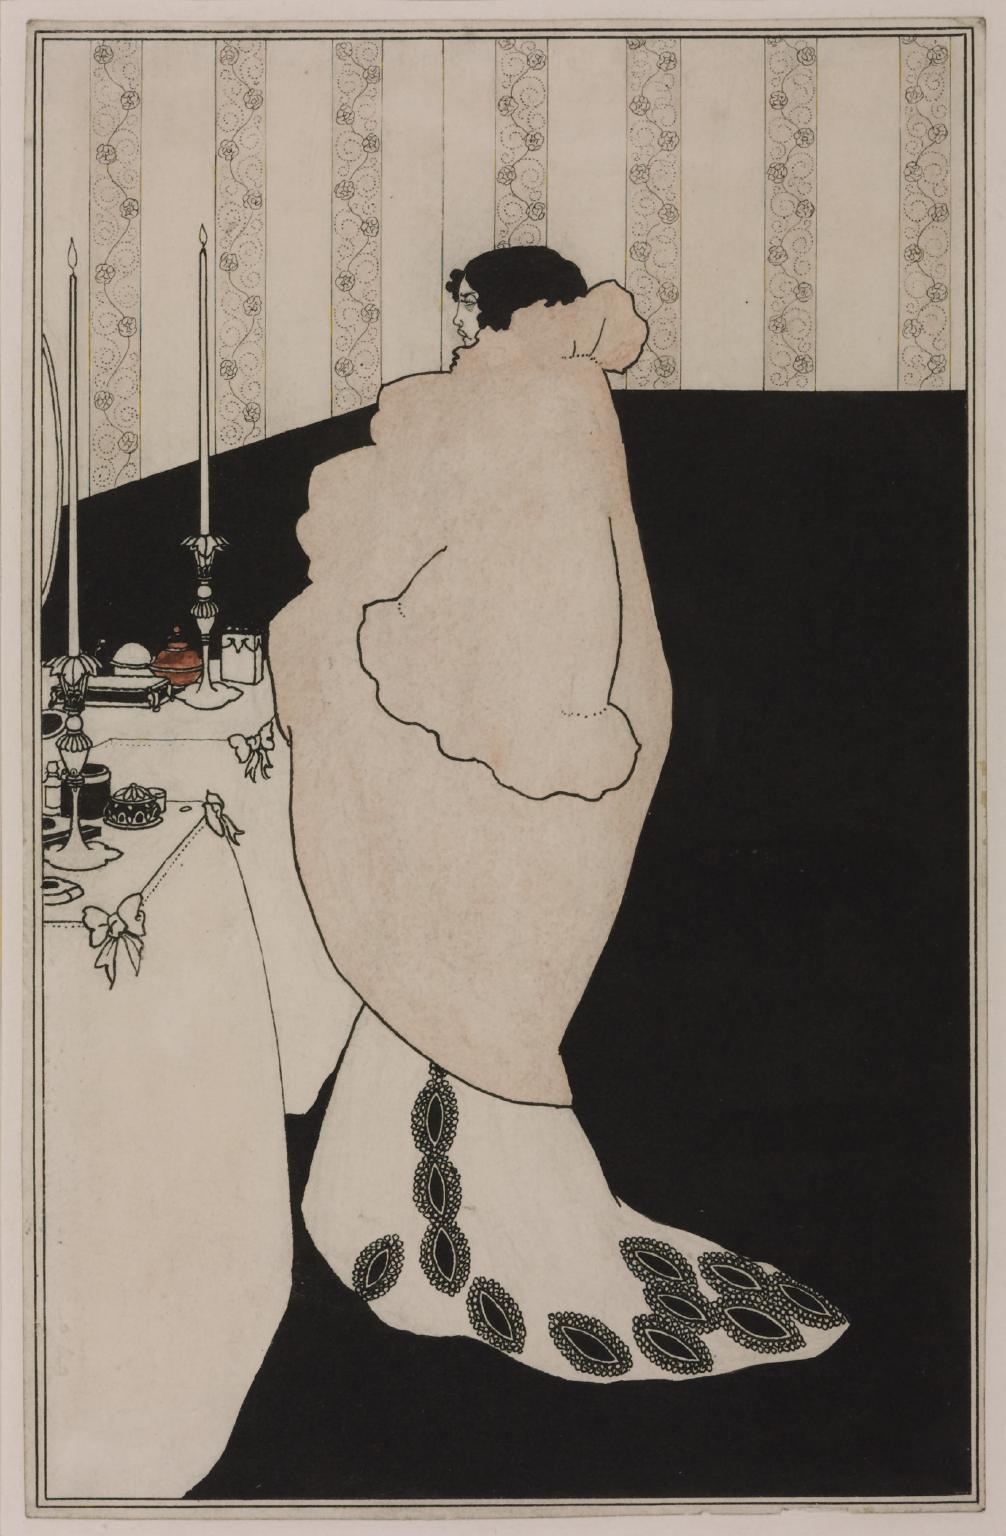 Lady with Camellias by Aubrey Beardsley - 1894 - 27.9 × 18.1 cm Victoria and Albert Museum